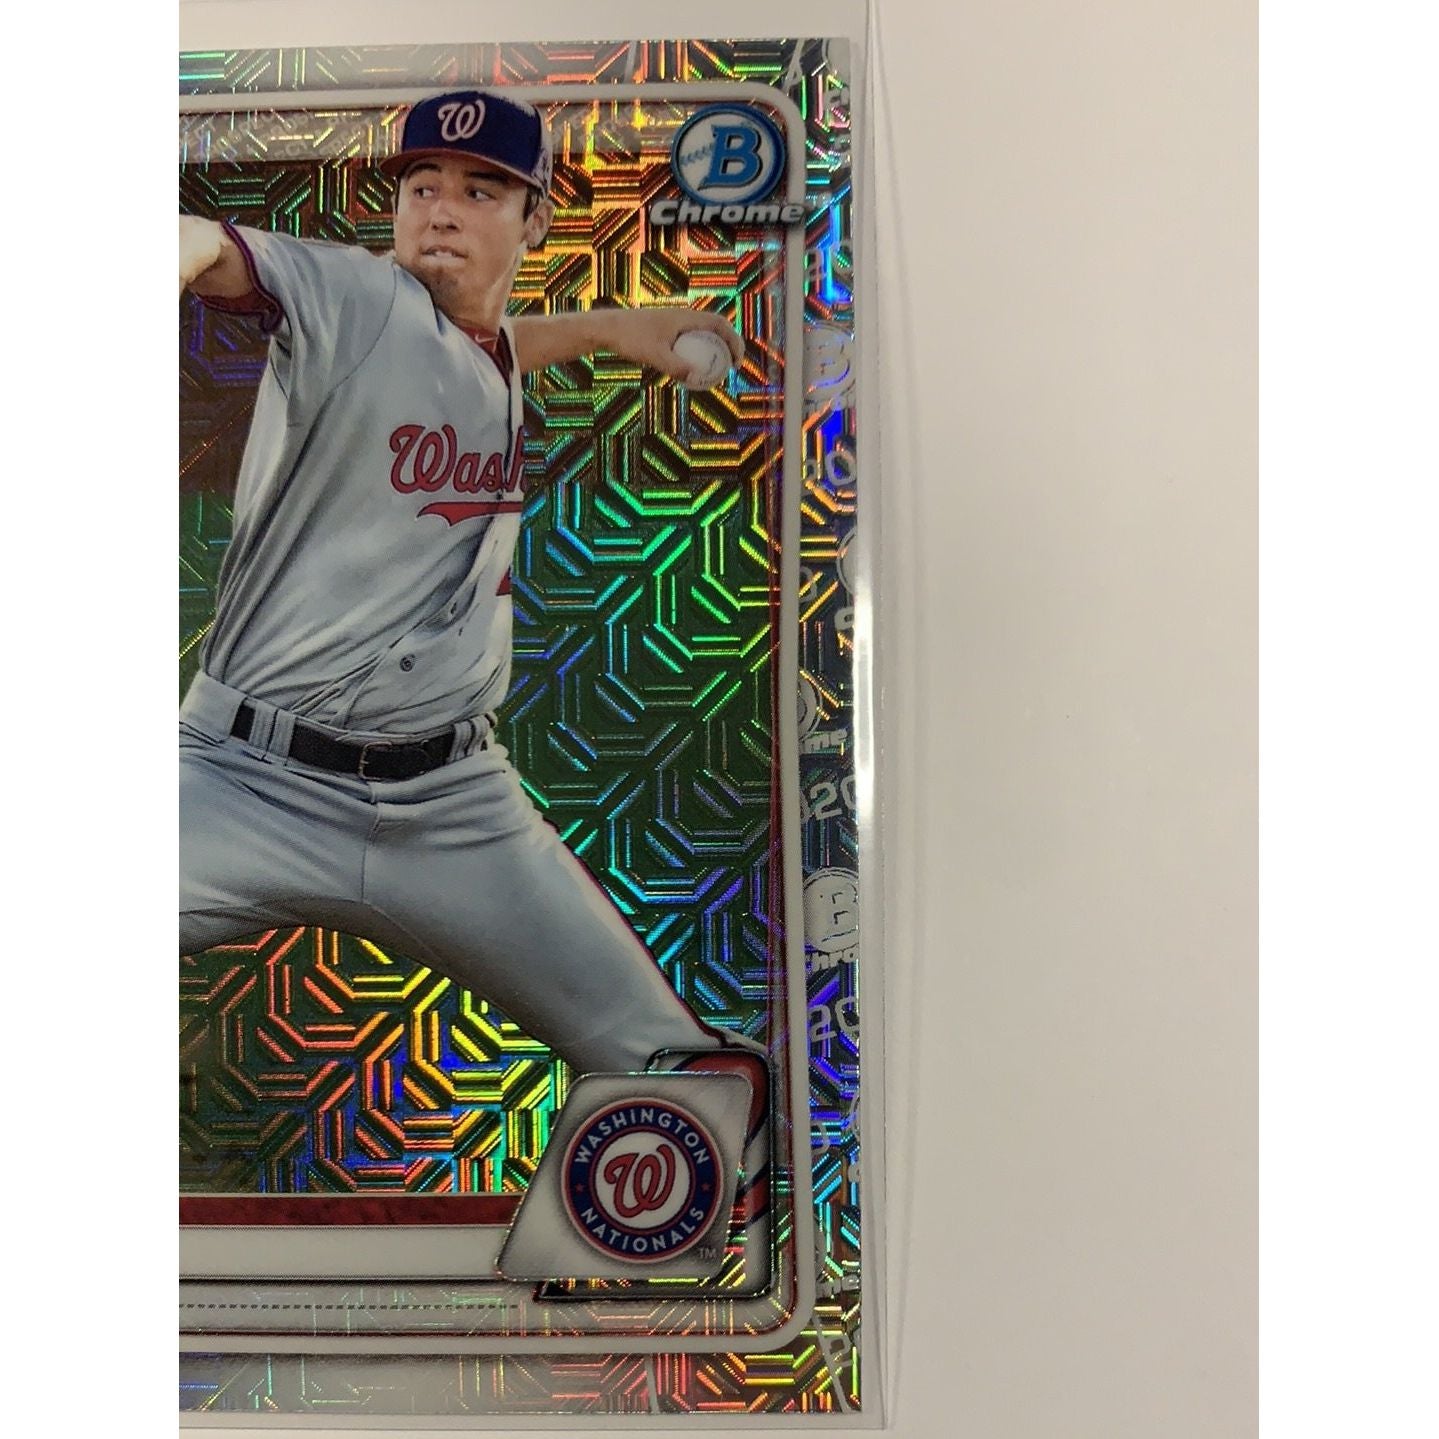  2020 Bowman Chrome Tim Cate Mojo Refractor  Local Legends Cards & Collectibles